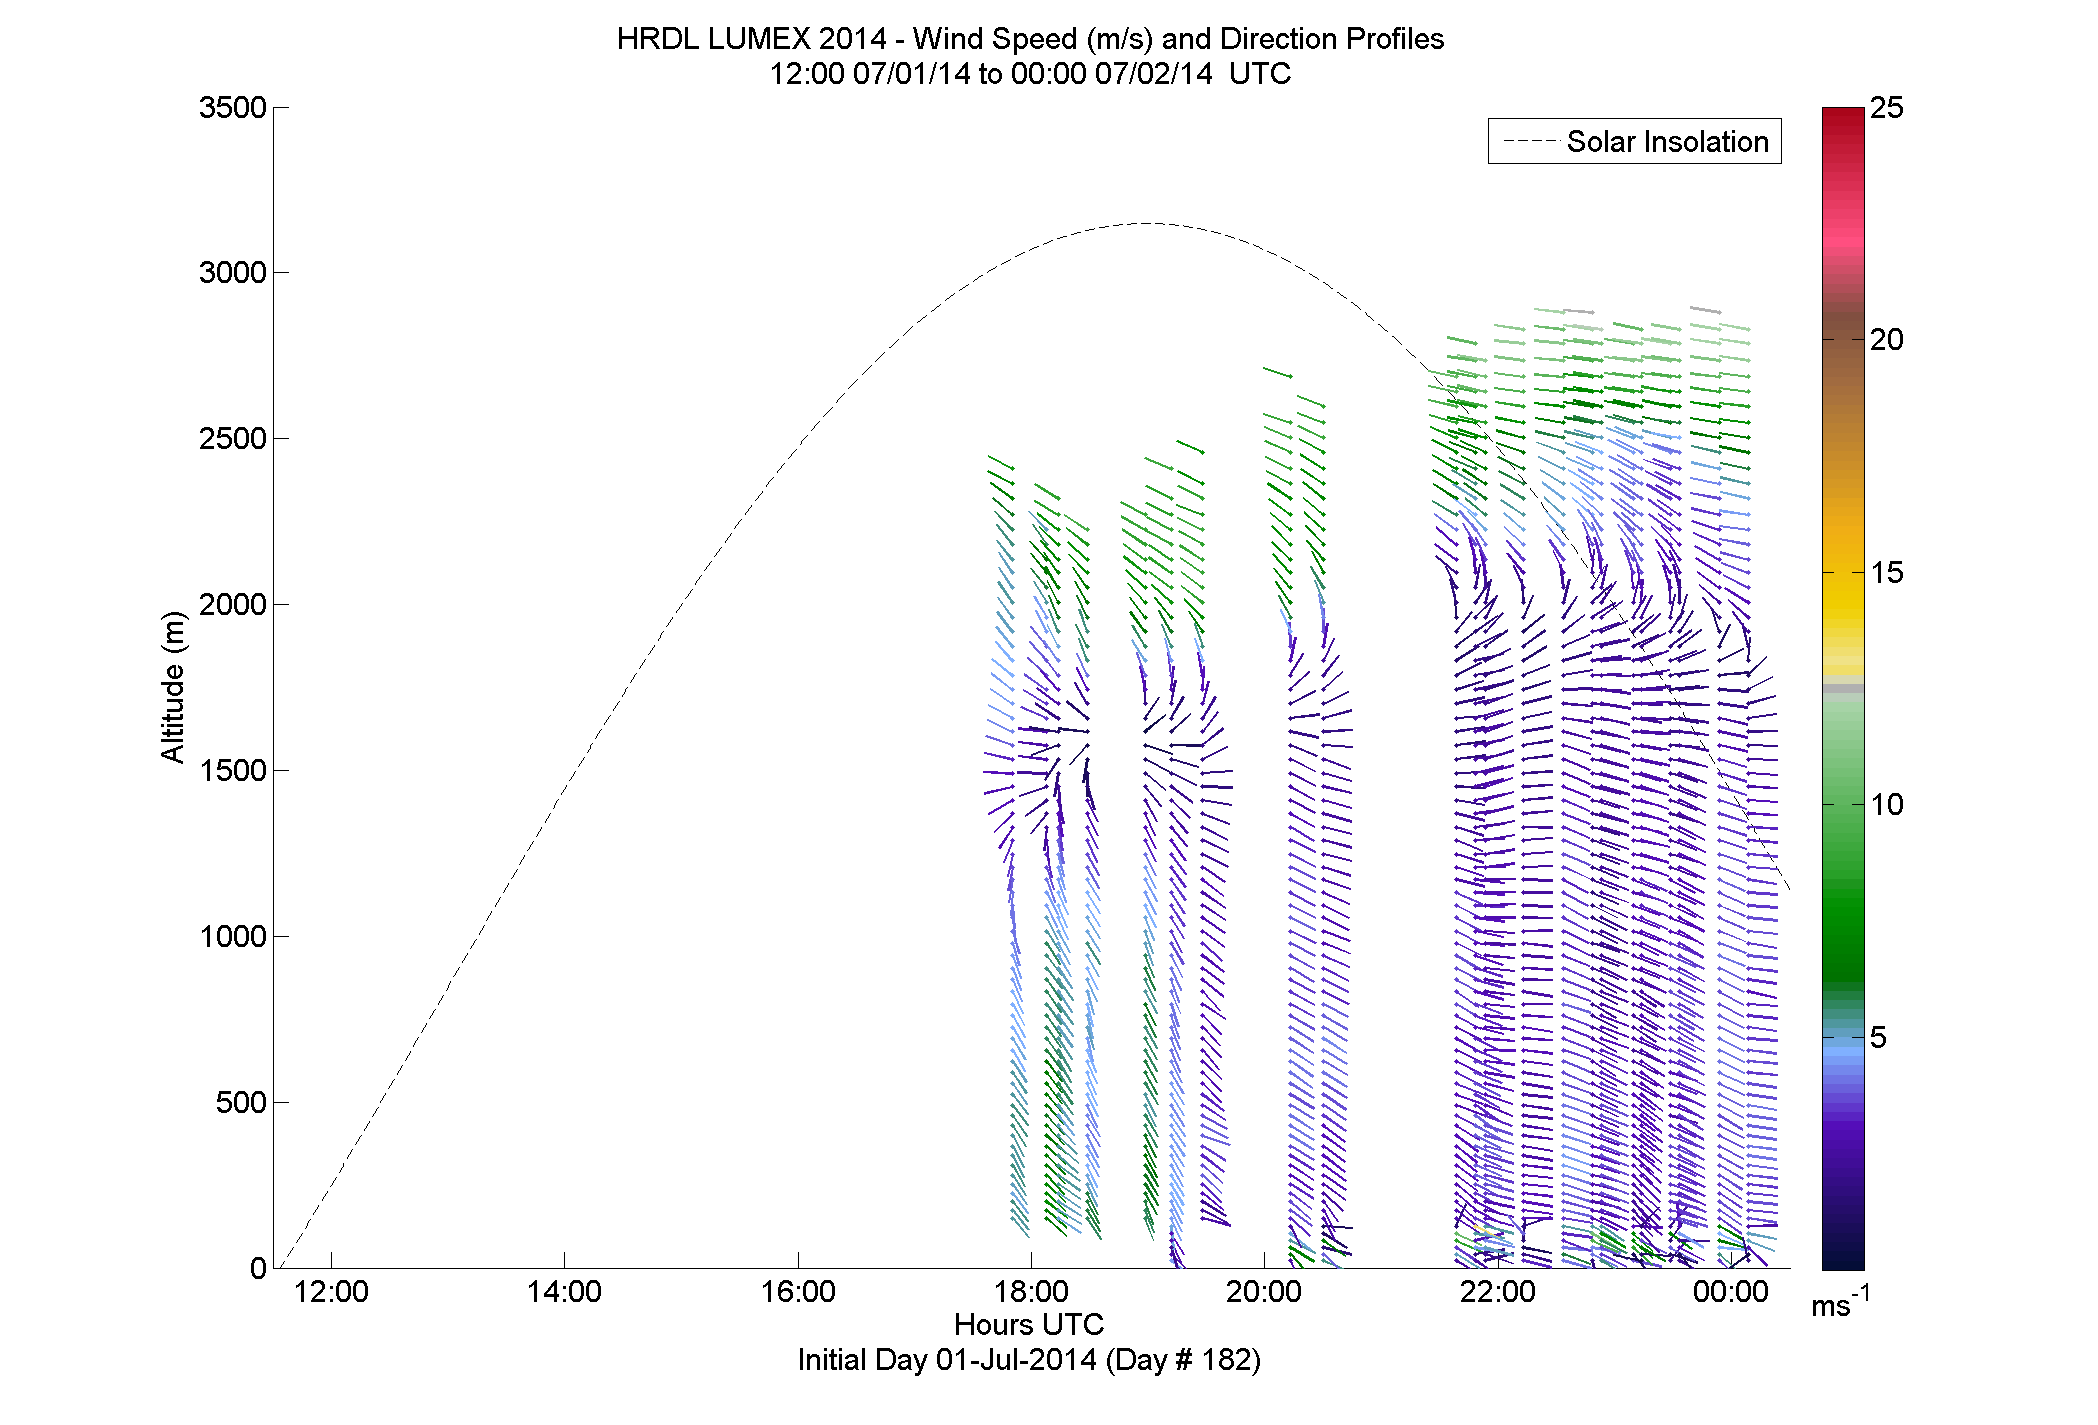 HRDL speed and direction profile - July 1 pm